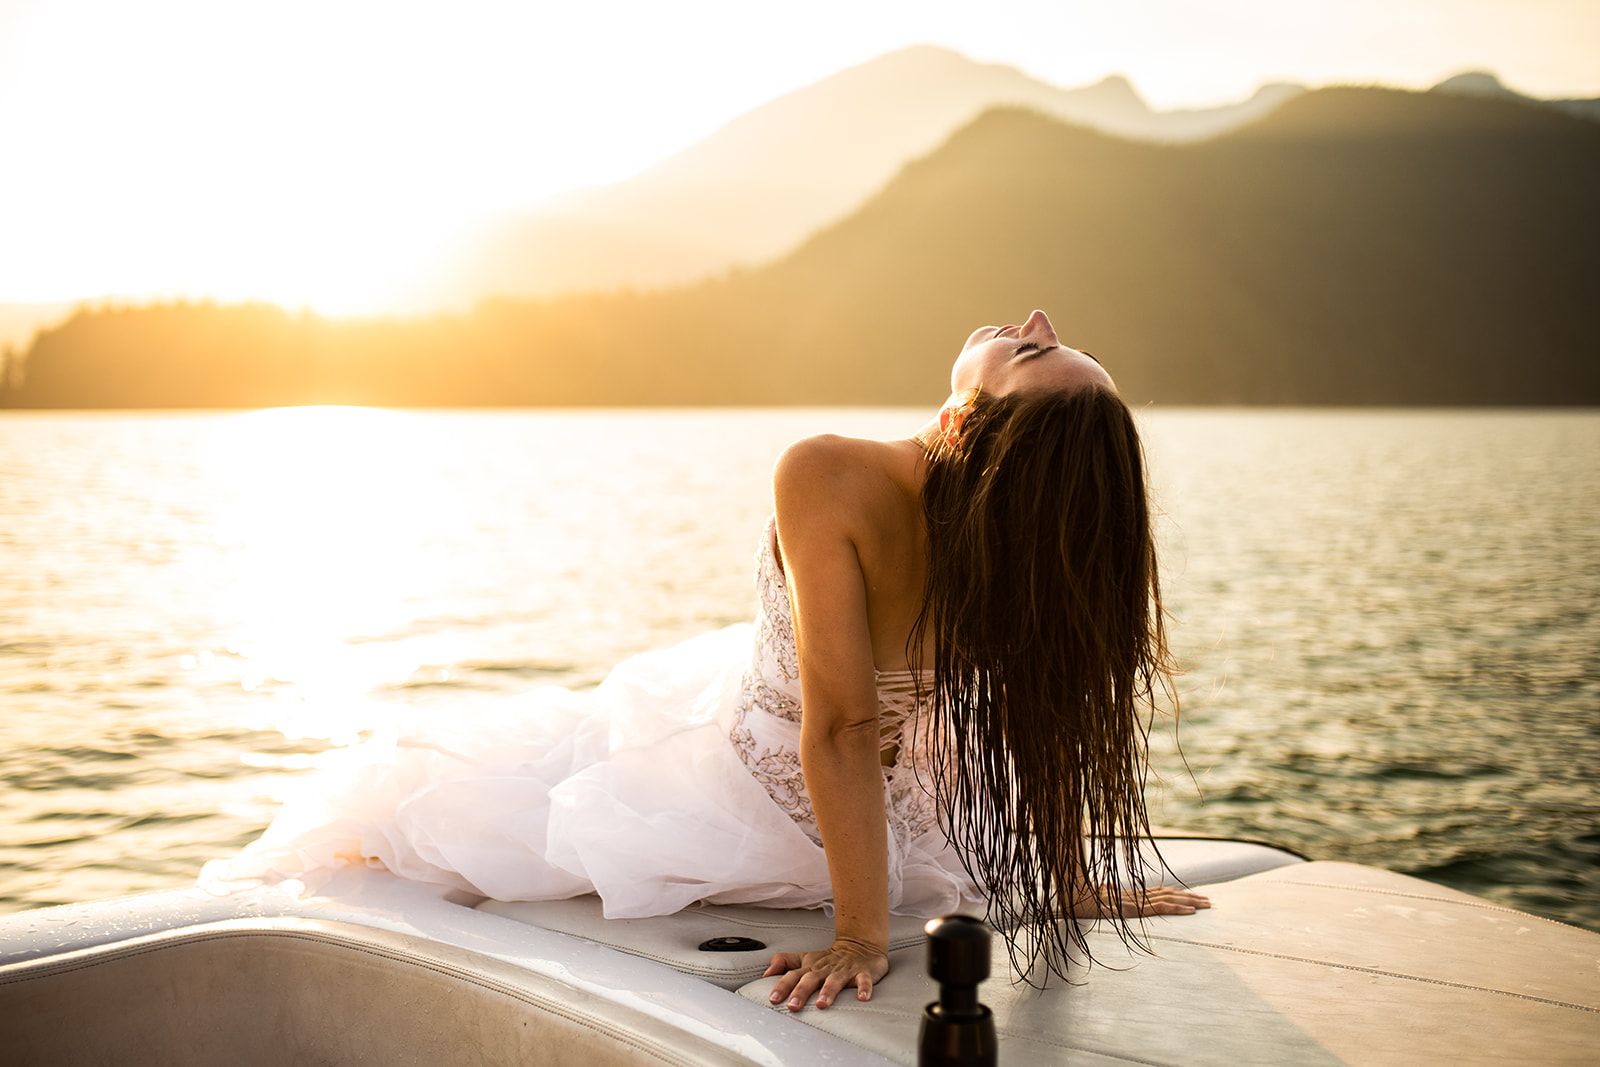 Bride leans back on front of speed boat 